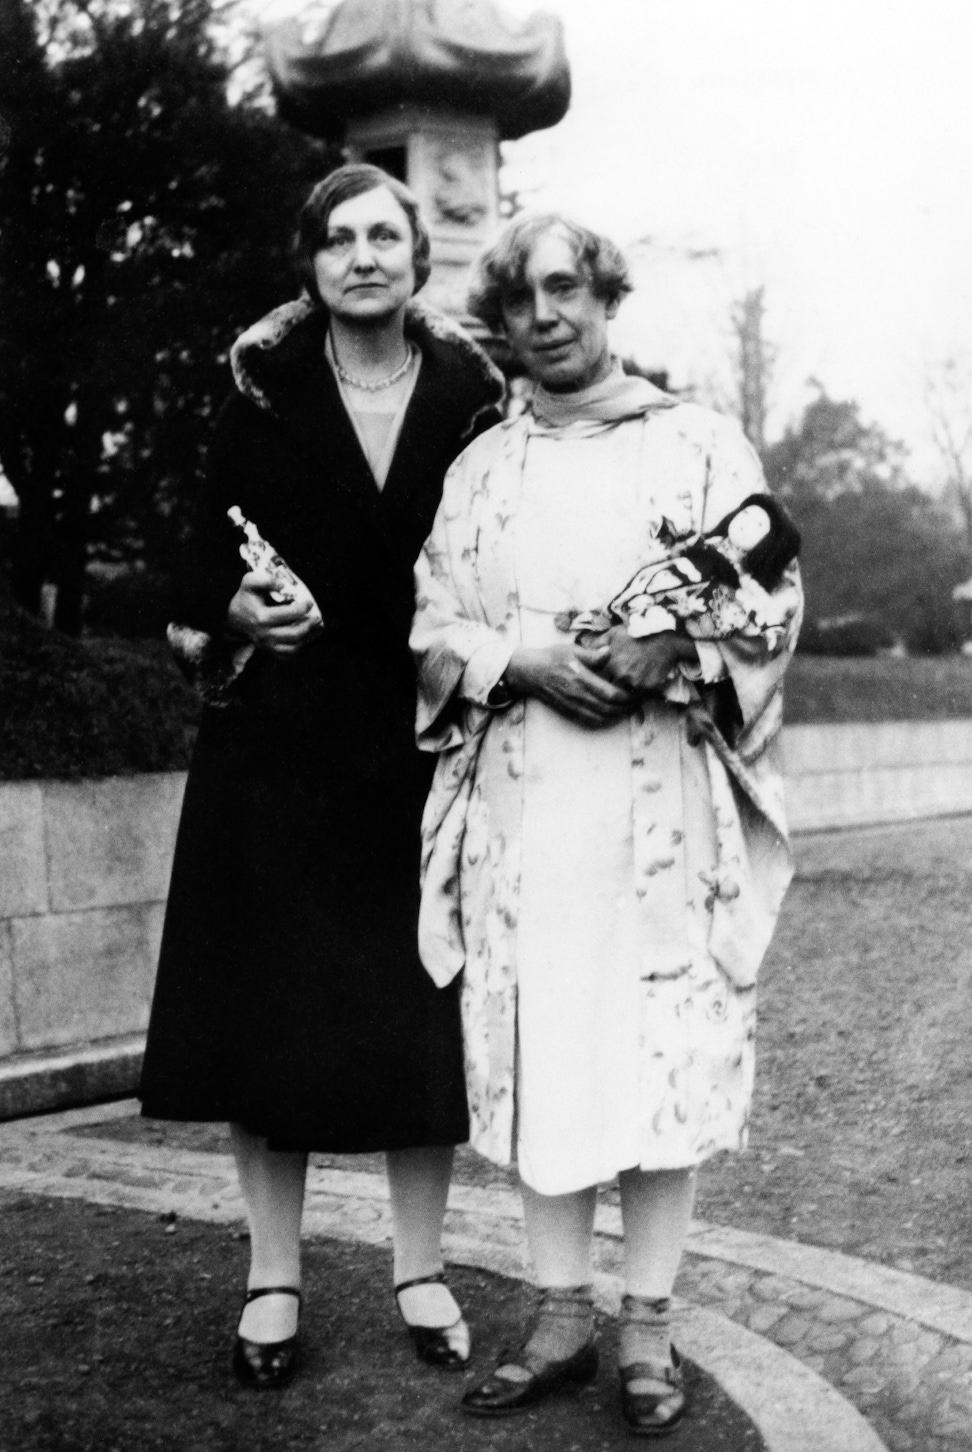 Hands of the Cause Agnes Alexander (left) and Martha Root (right) in Japan, c. 1930